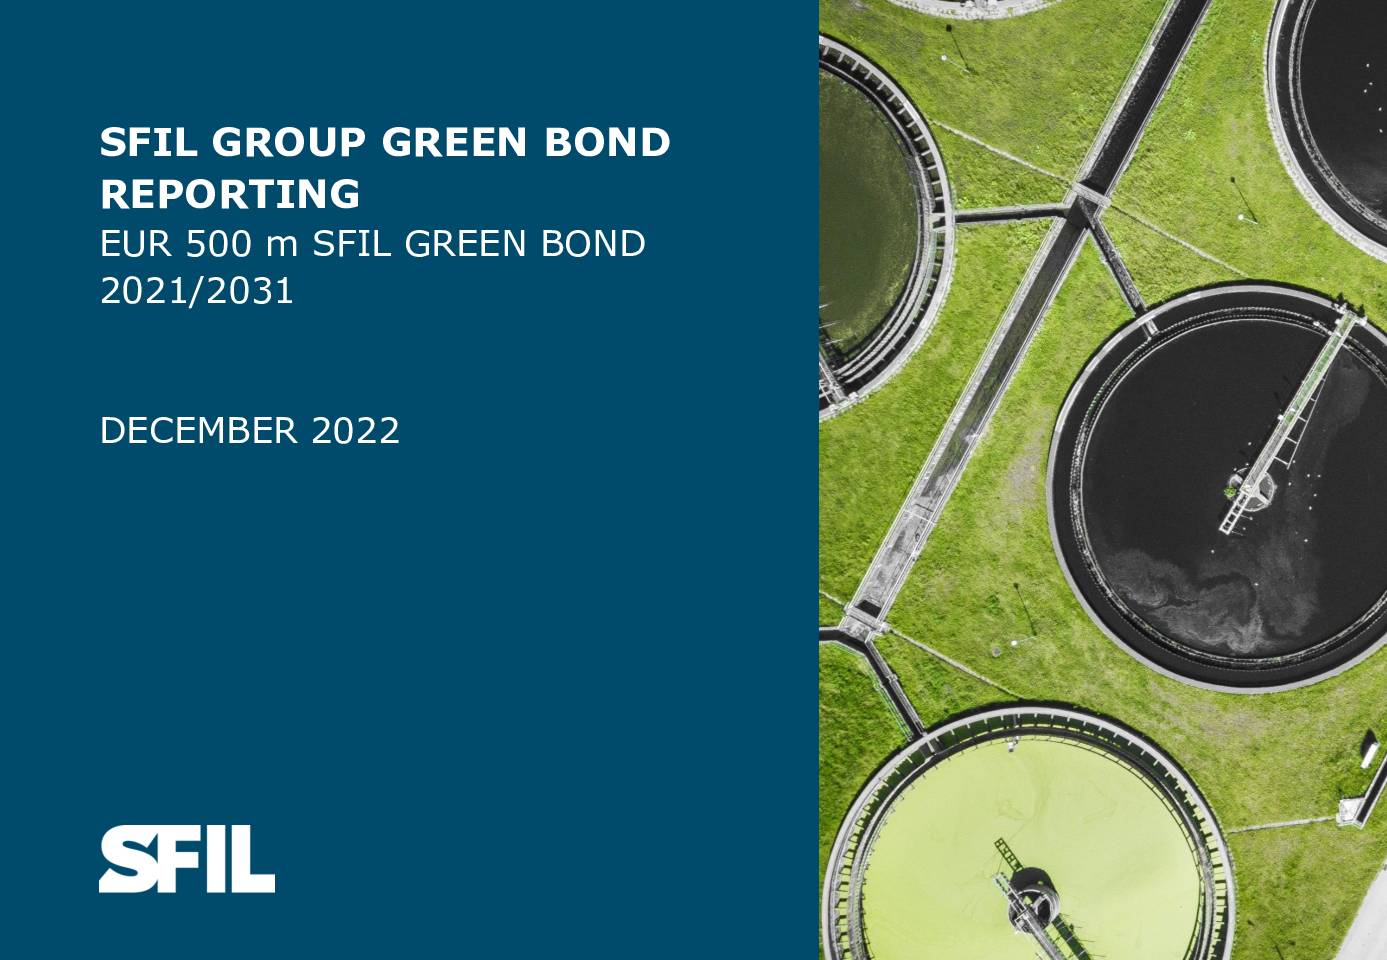 Publication of the 2022 Green Bond Reporting